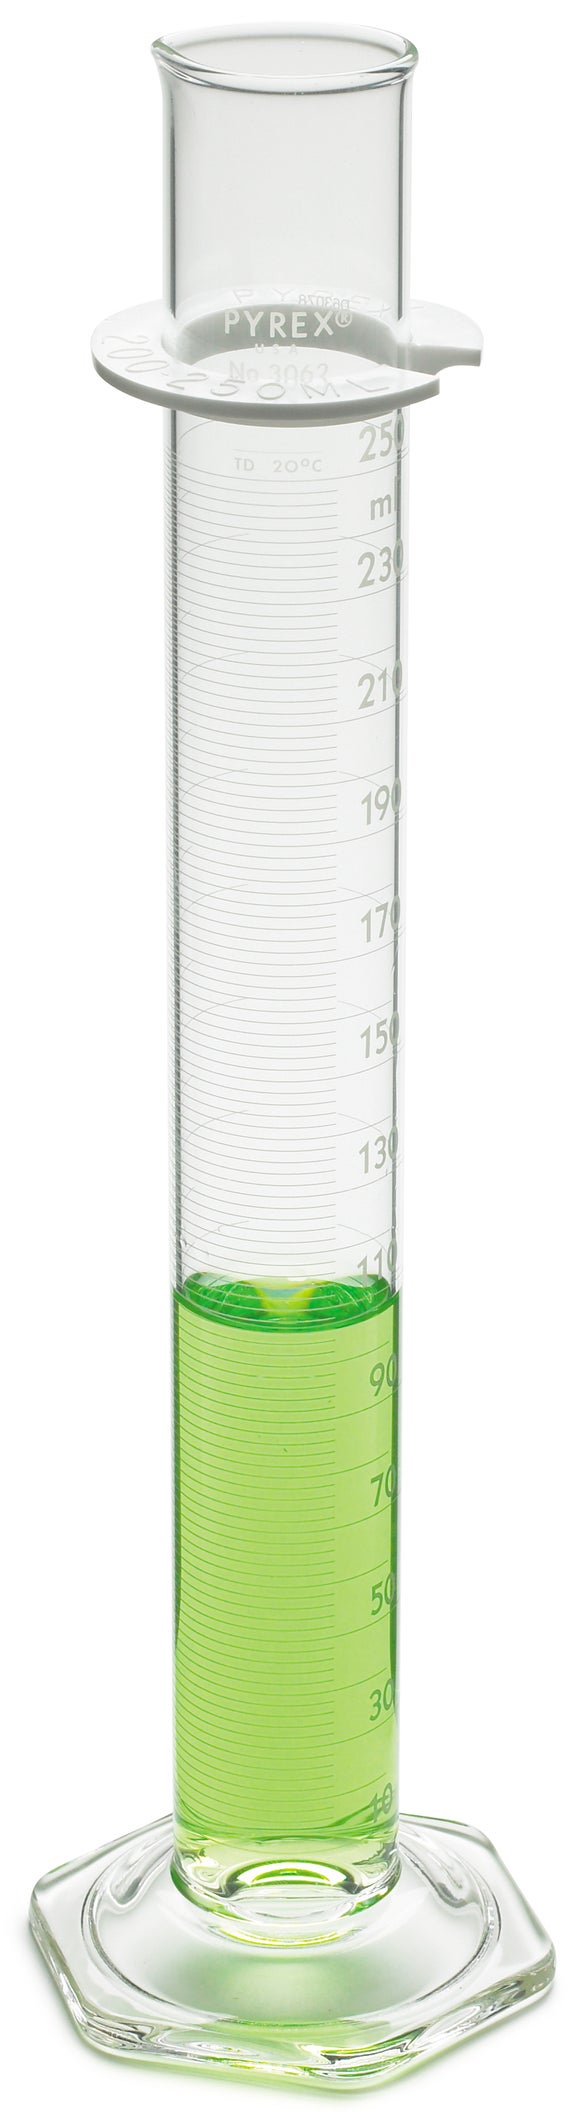 Cylinder, Graduated, 50 mL, Certified